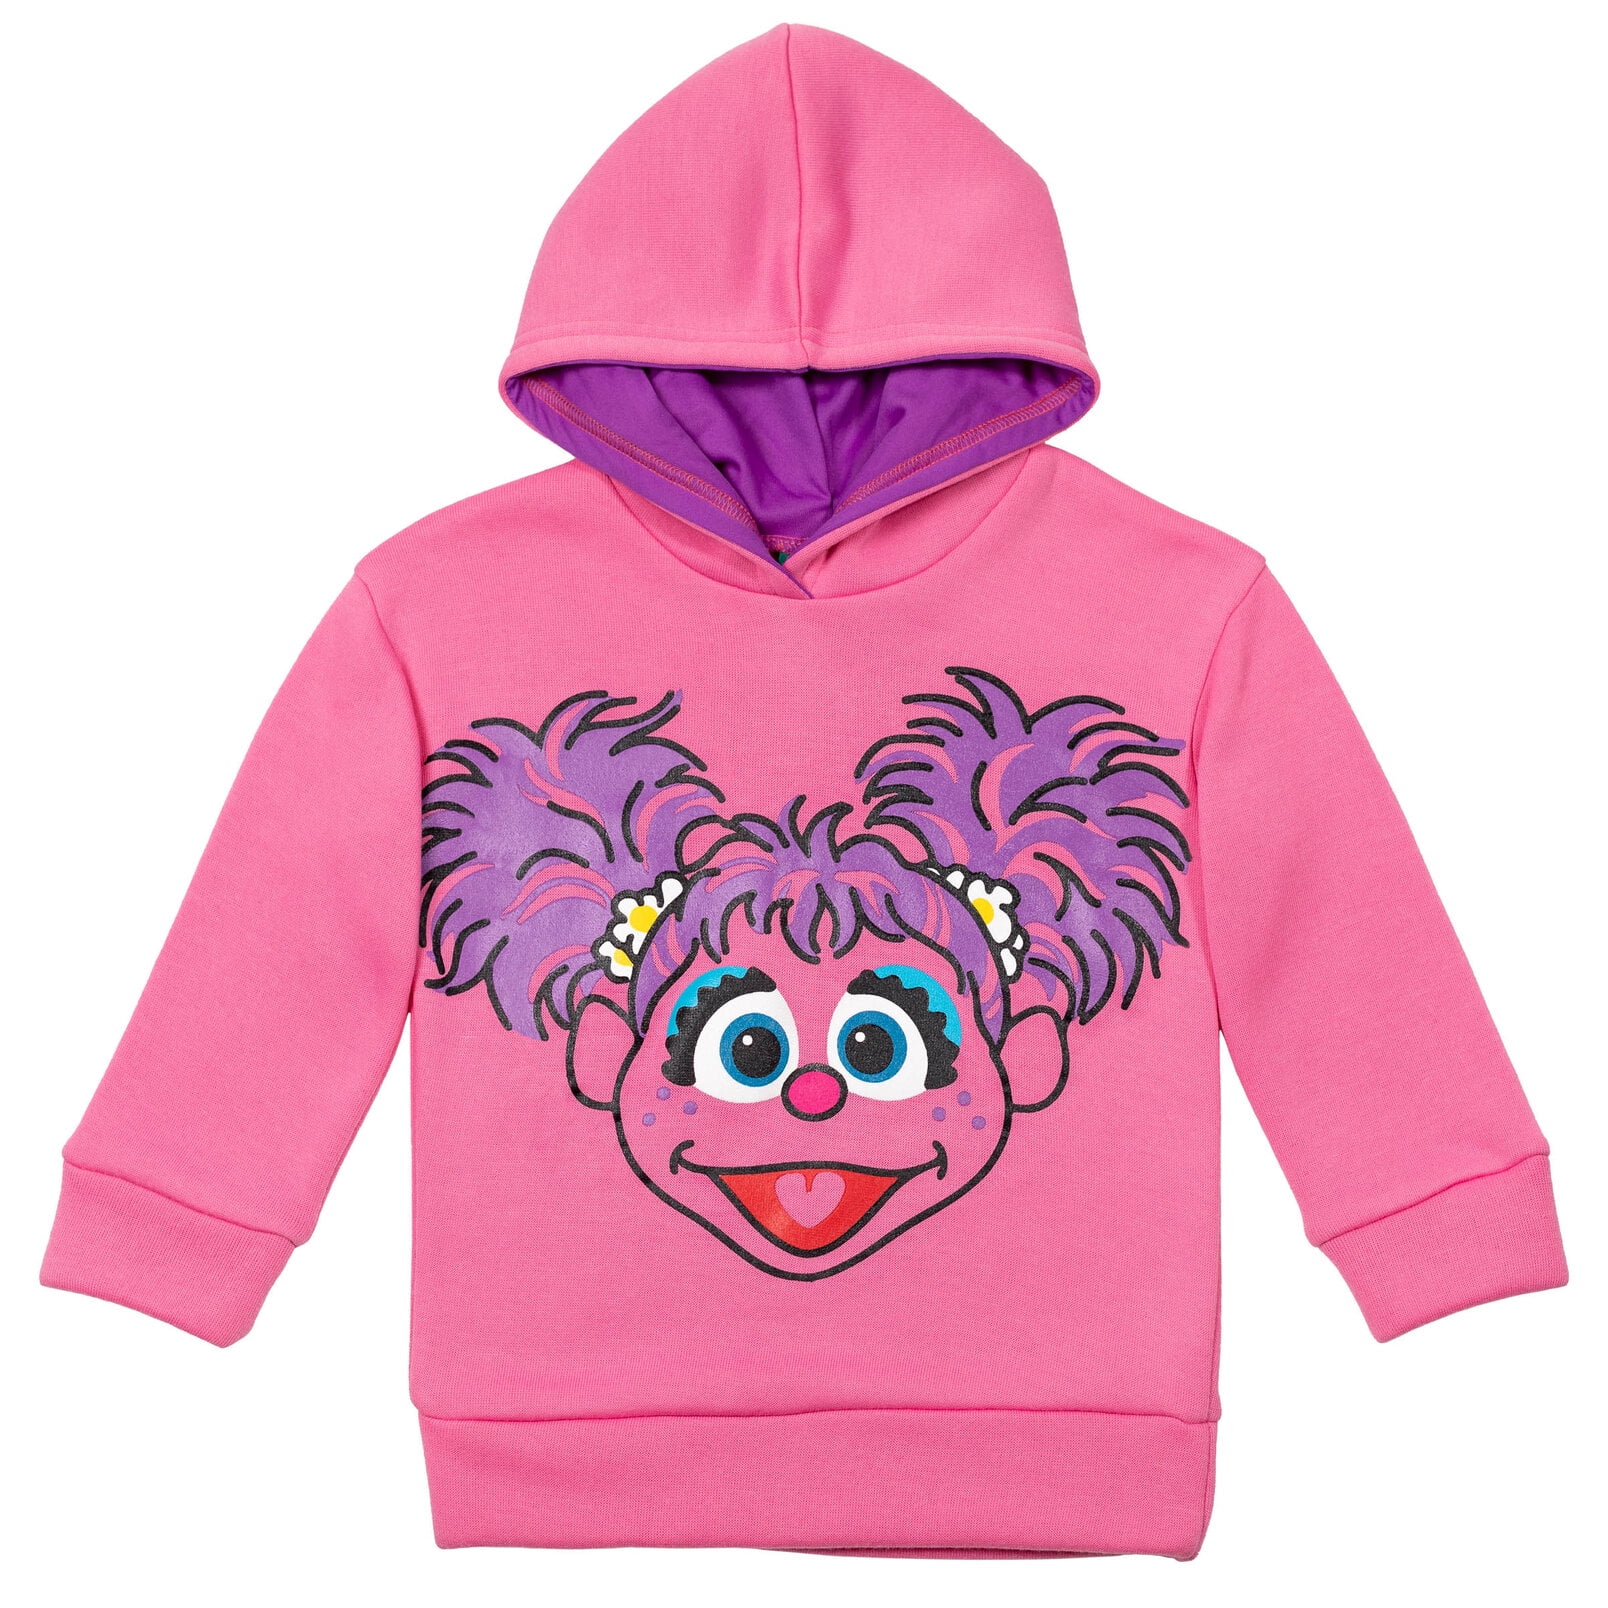 Personalised 1st,2,3,4,5,6th Birthday Outfit Hoodie,Jumper,Top Baby/Kids Gift 